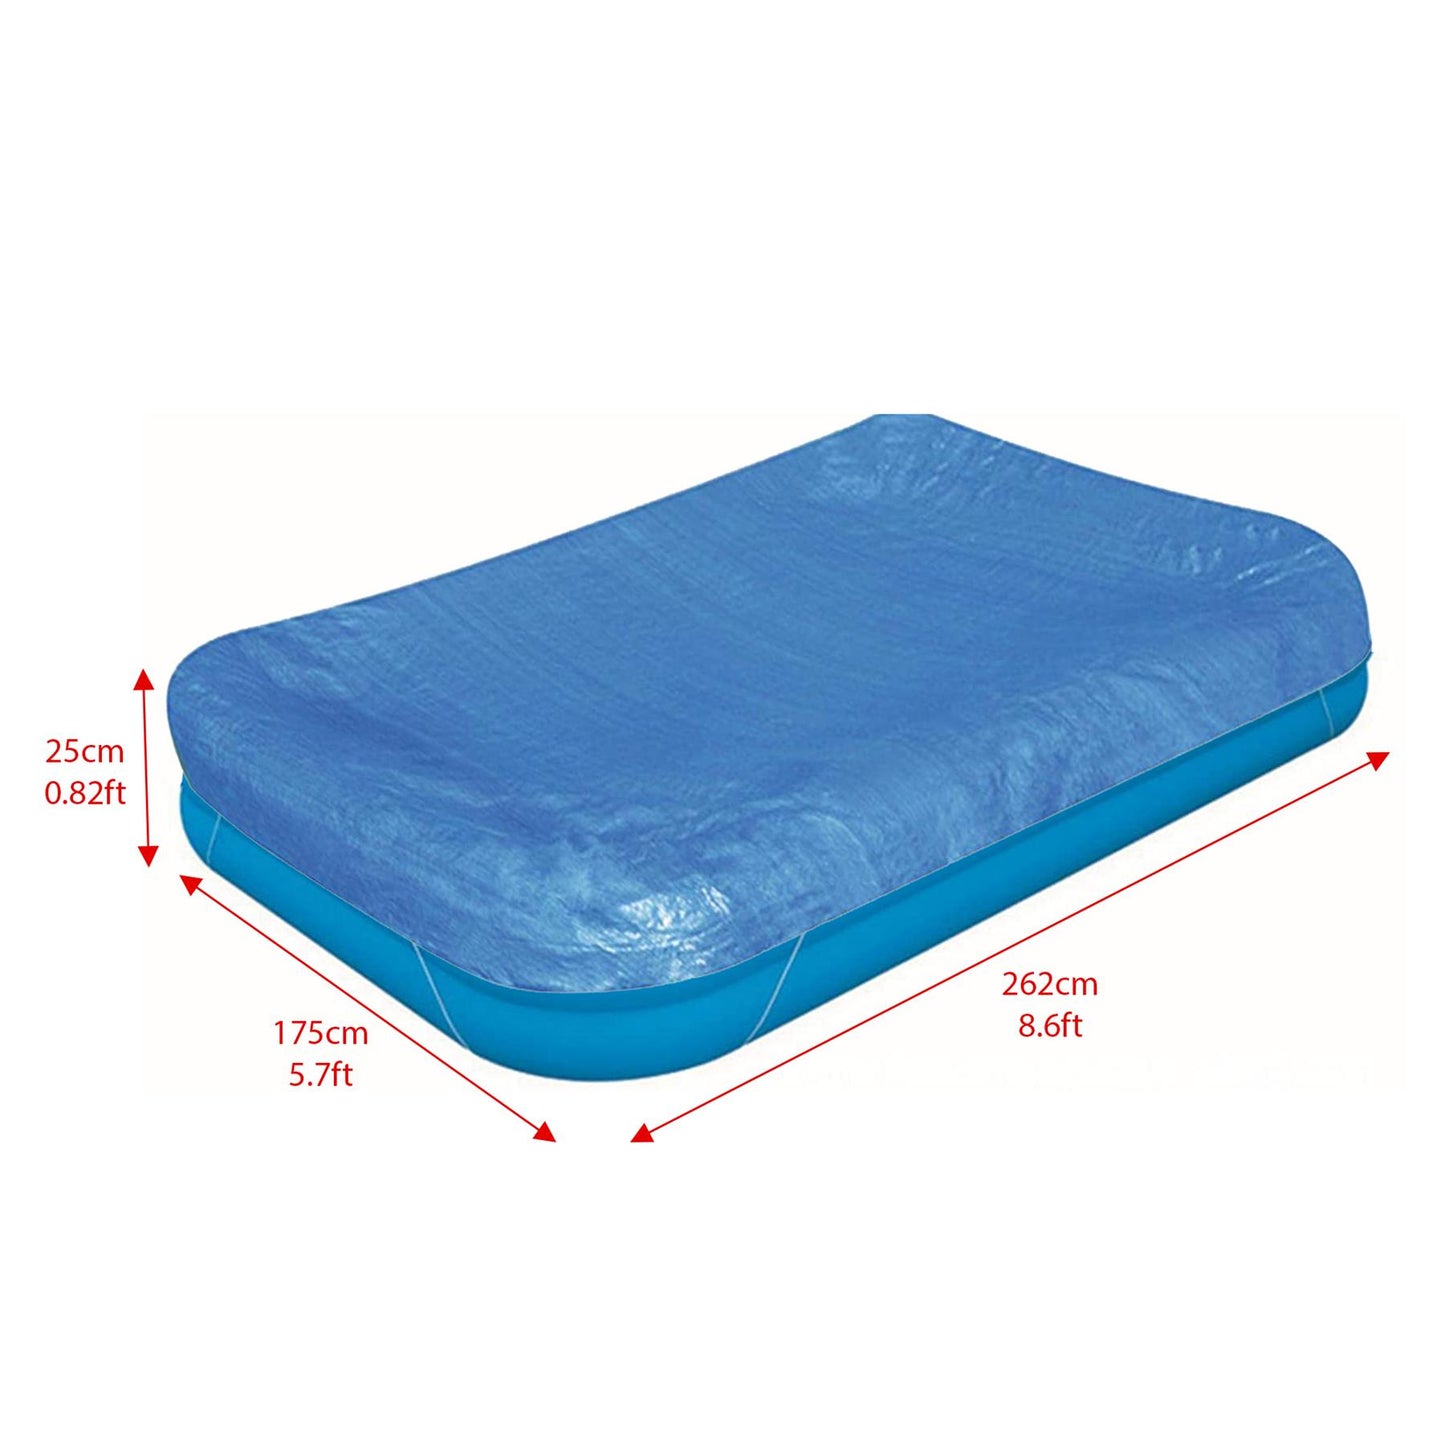 Keep Your Pool Clean with a Pool Cover